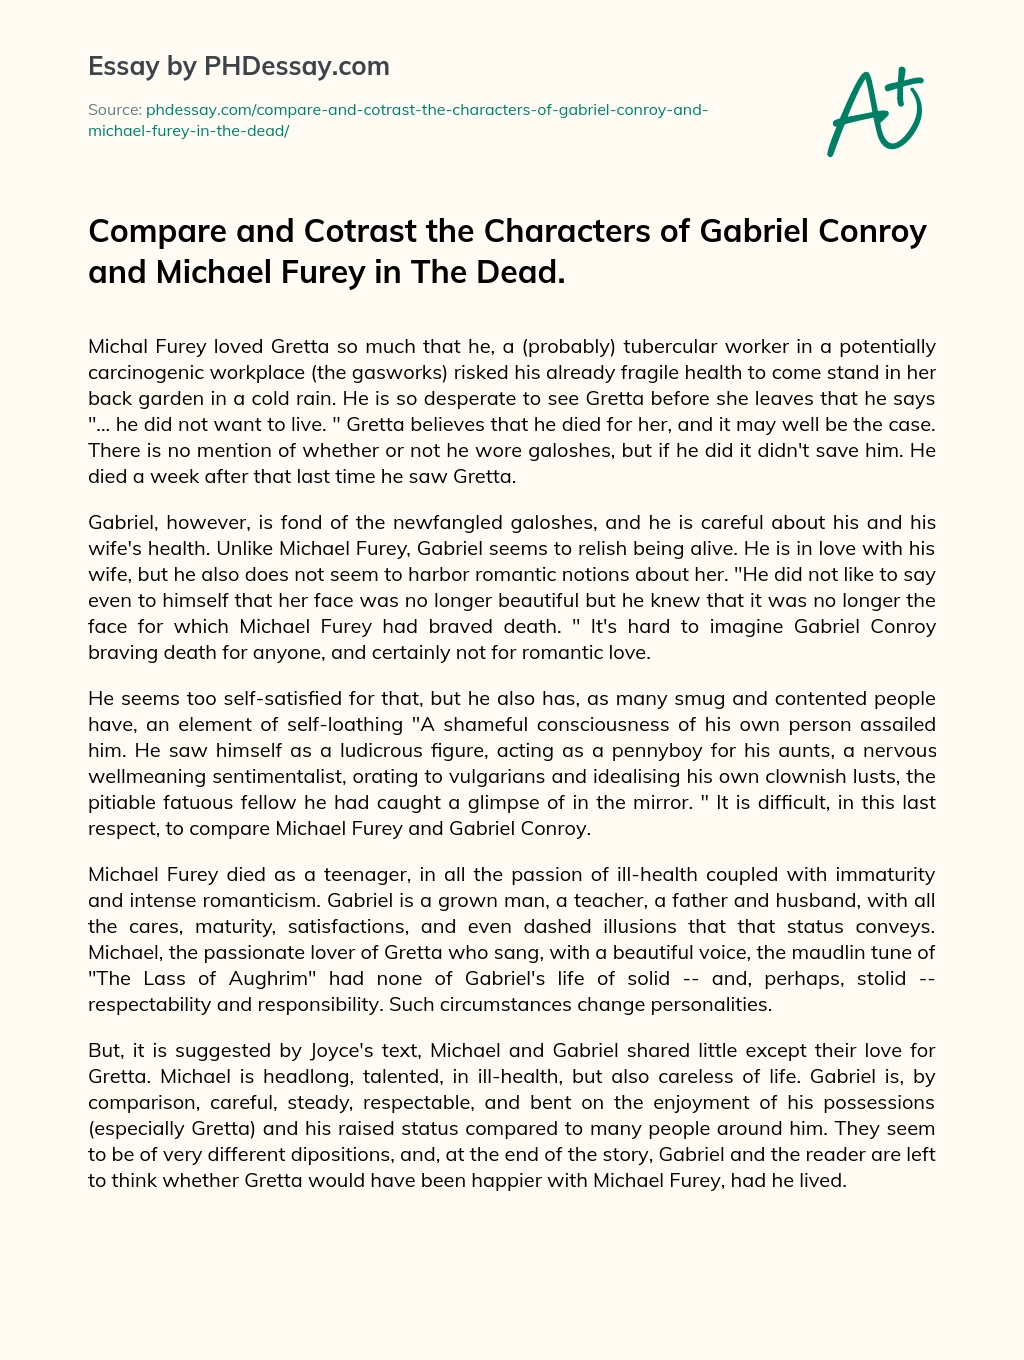 Compare and Cotrast the Characters of Gabriel Conroy and Michael Furey in The Dead. essay